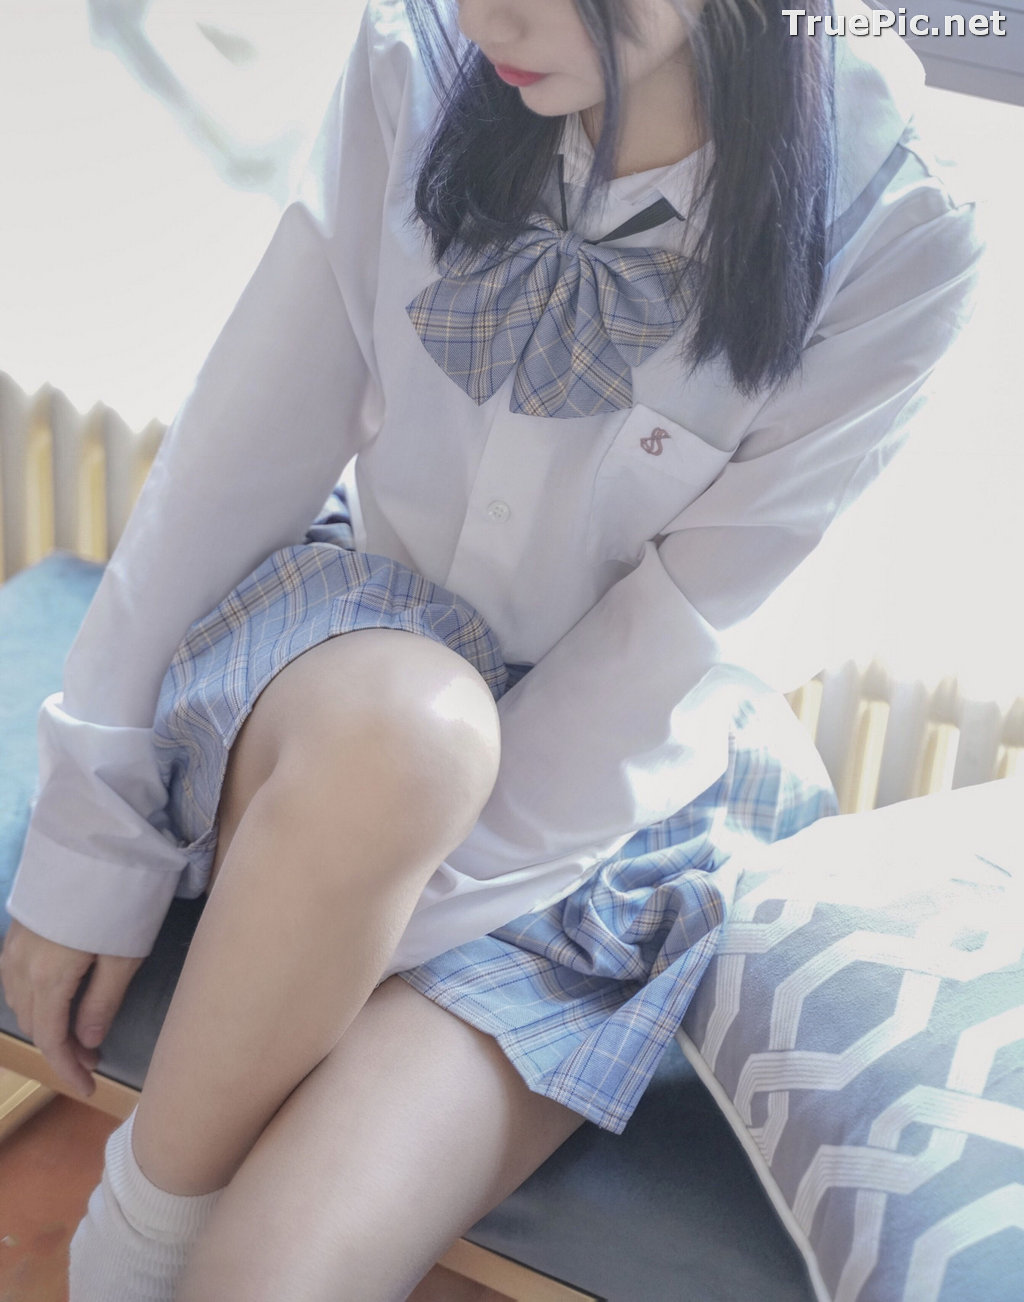 Image [MTCos] 喵糖映画 Vol.047 – Chinese Cute Model – Sexy Student Uniform - TruePic.net - Picture-5